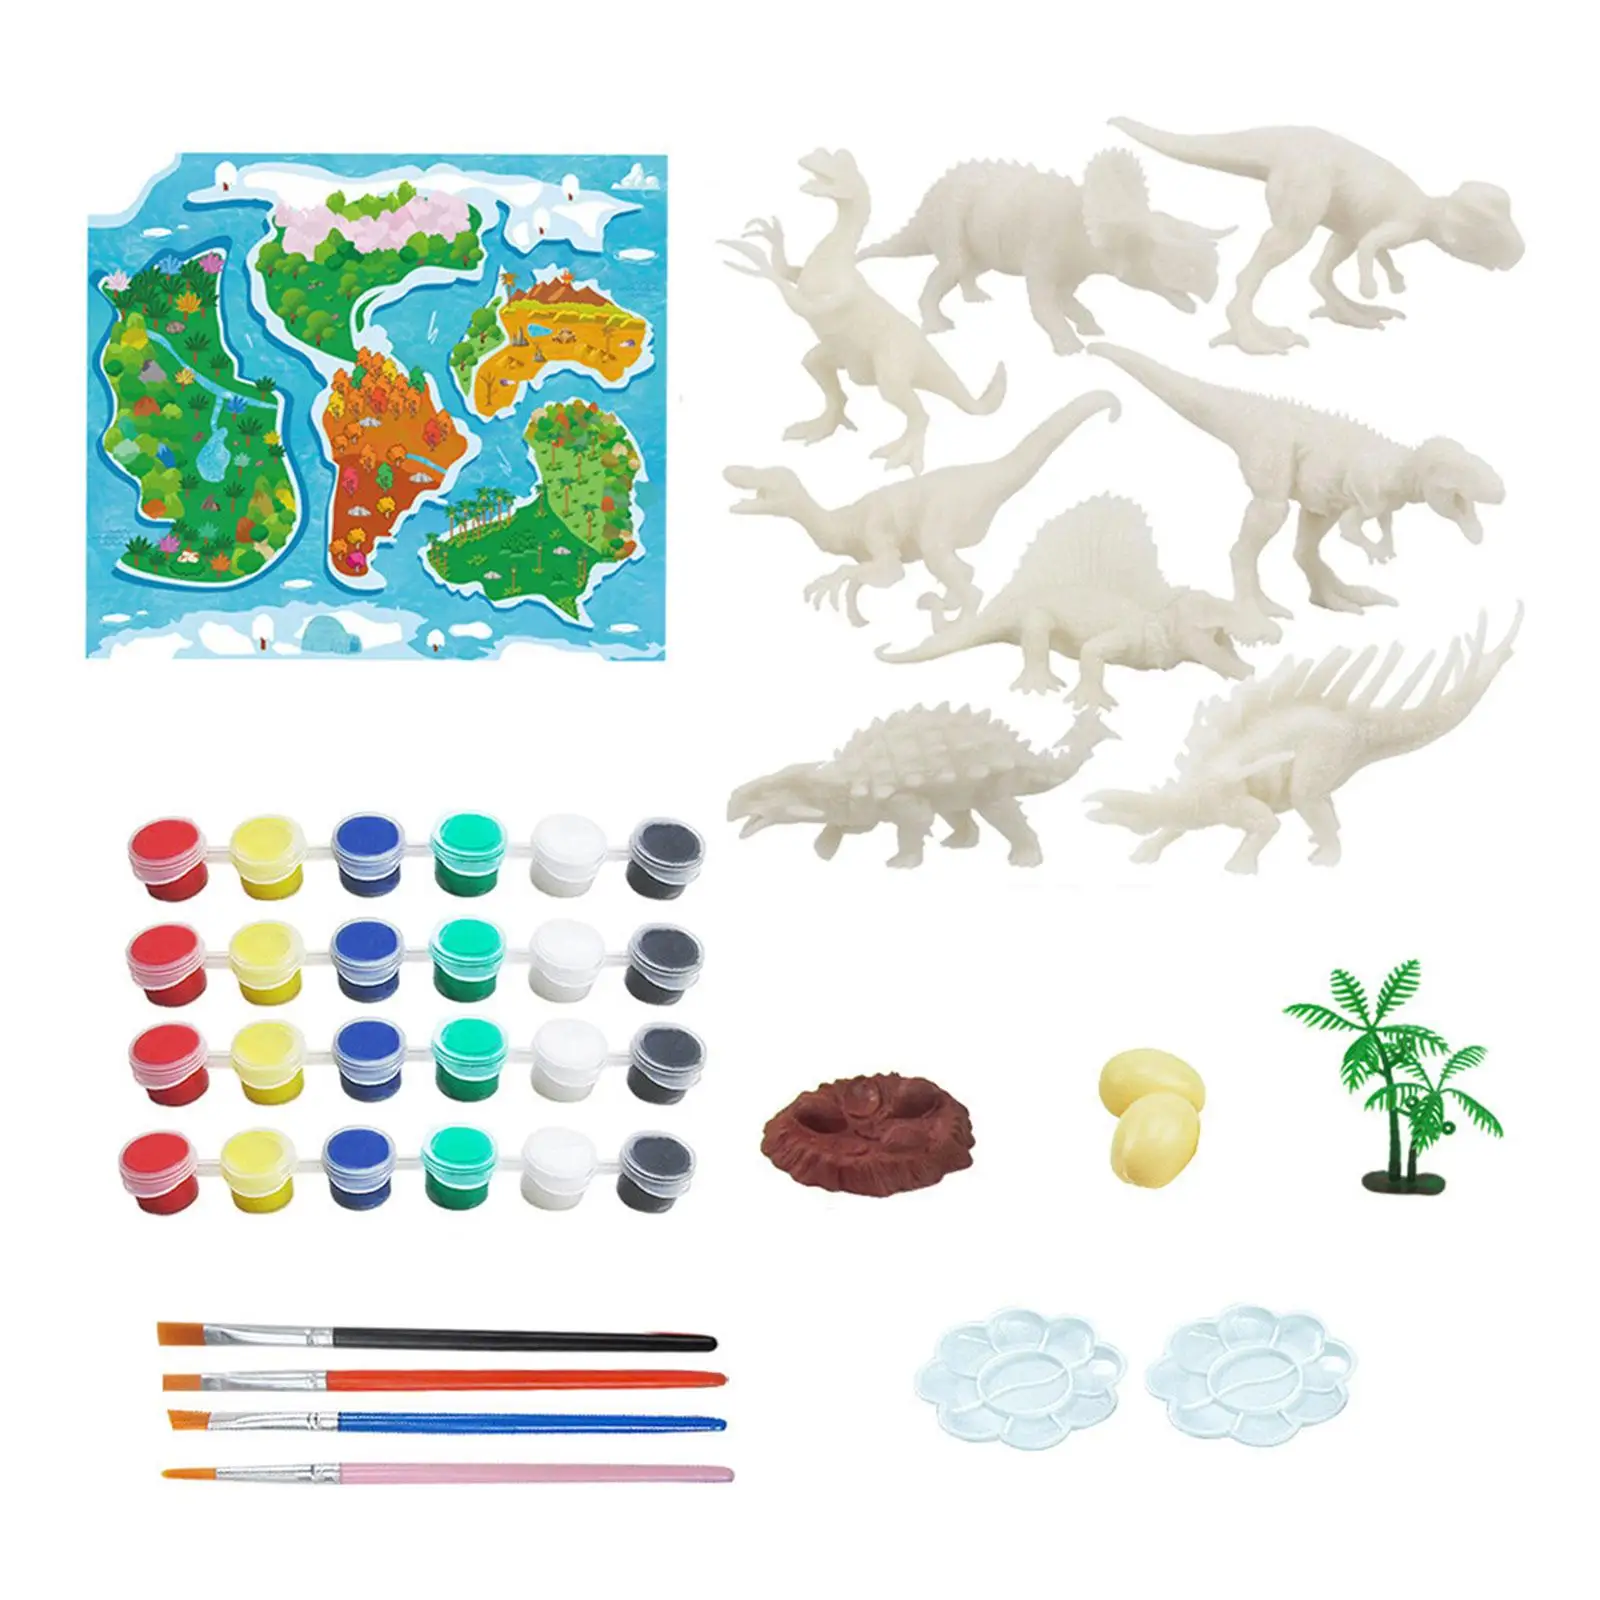 DIY Coloring Dinosaur Model Dinosaur Coloring Supplies Toy Crafts Hand Painted Dinosaur Painting Kit for Party Activity